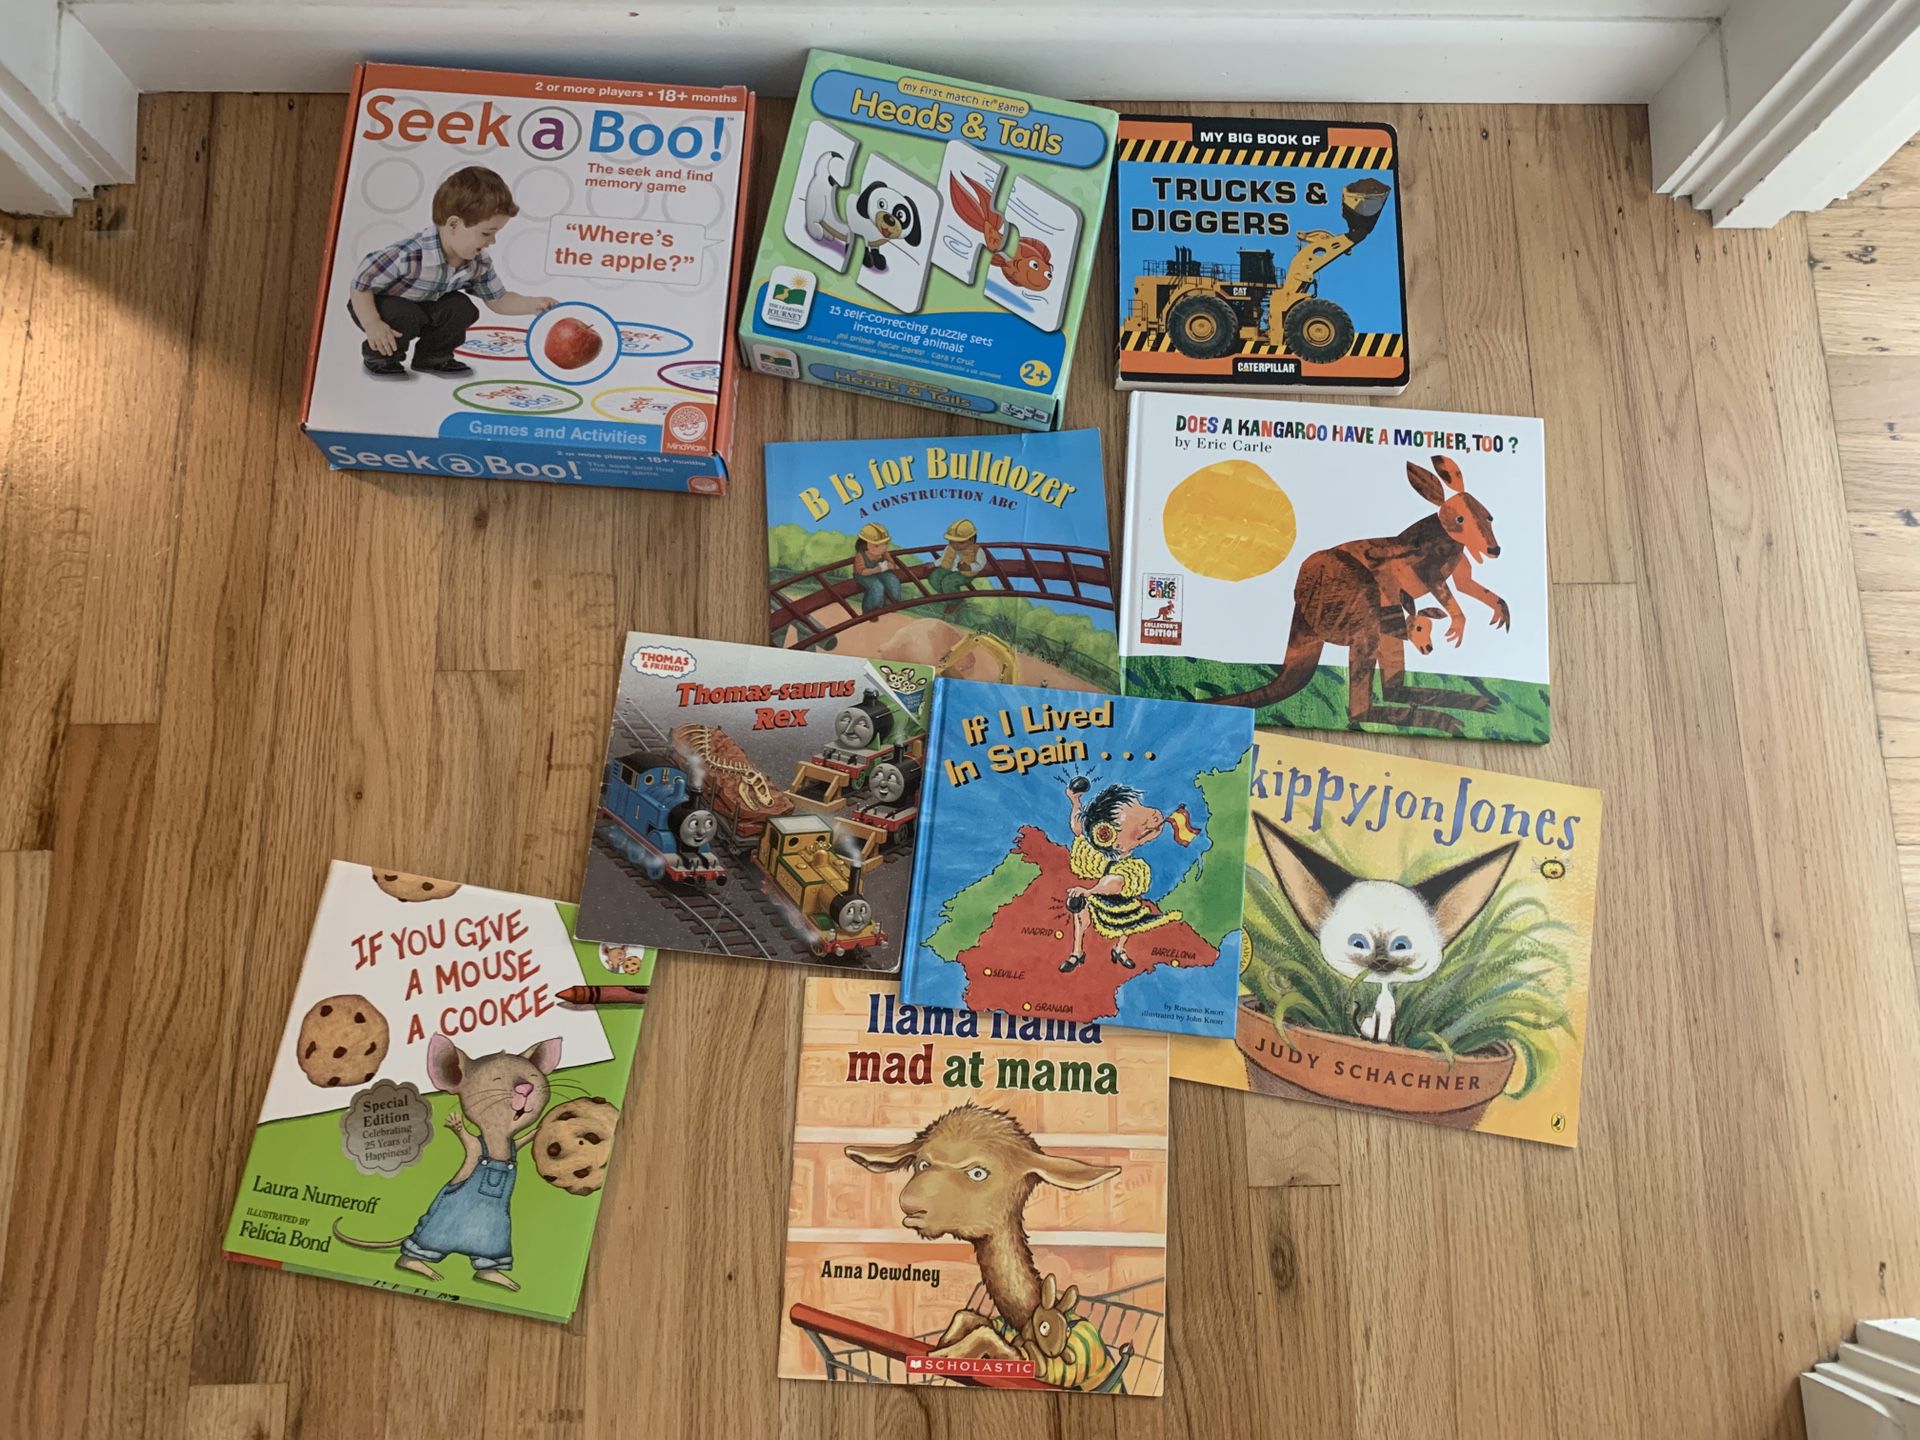 Book and games for kids